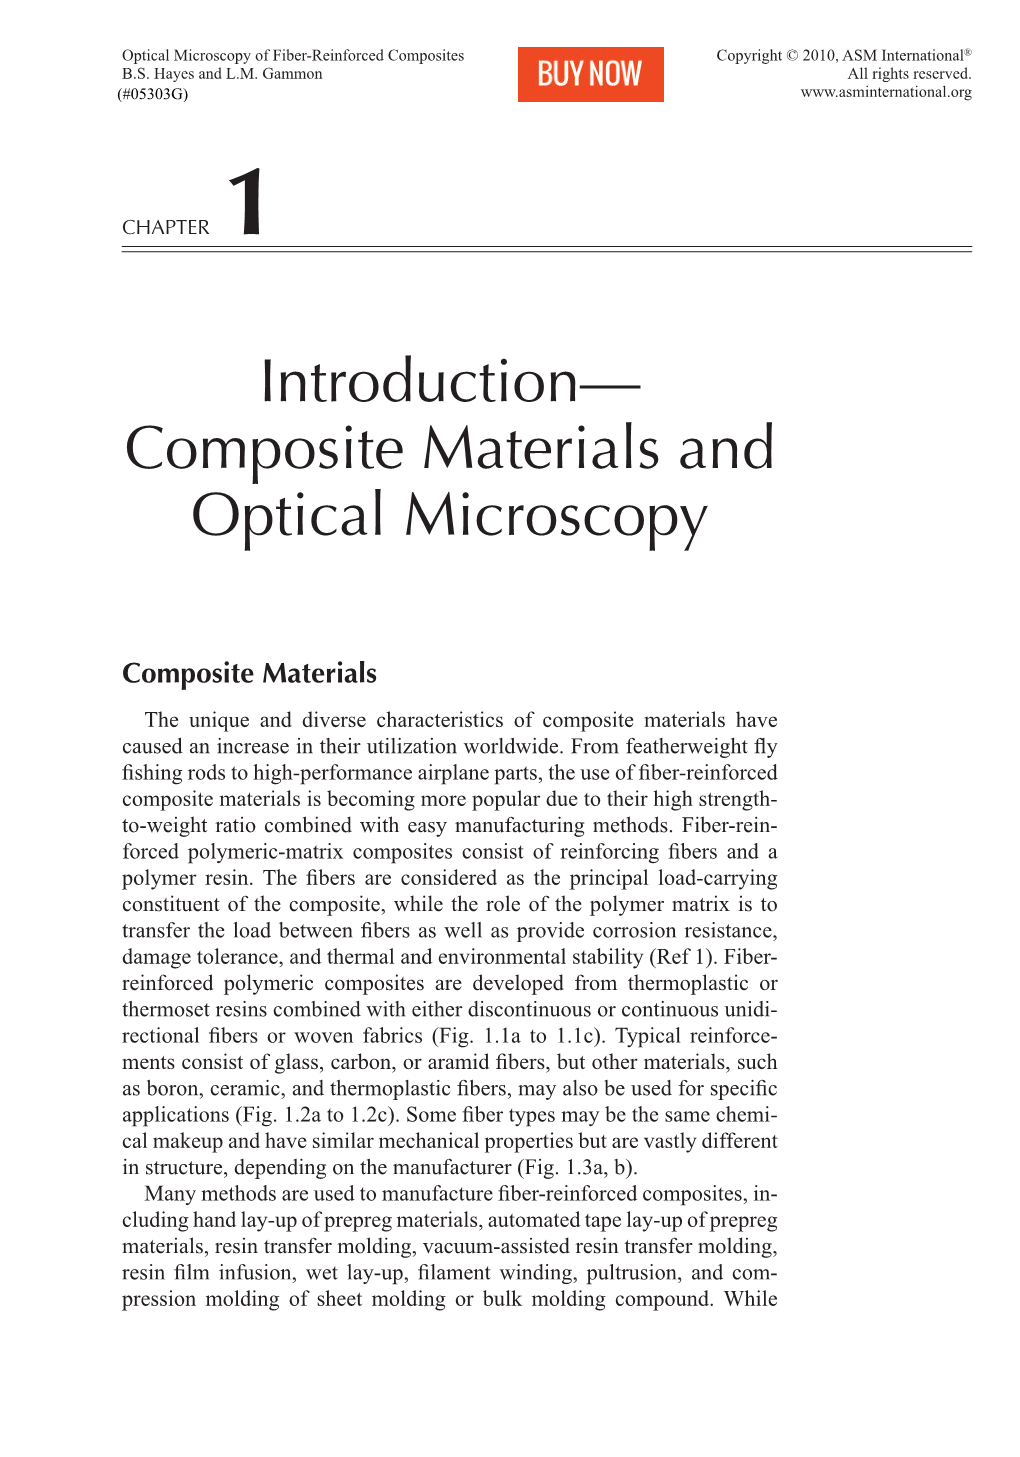 Composite Materials and Optical Microscopy